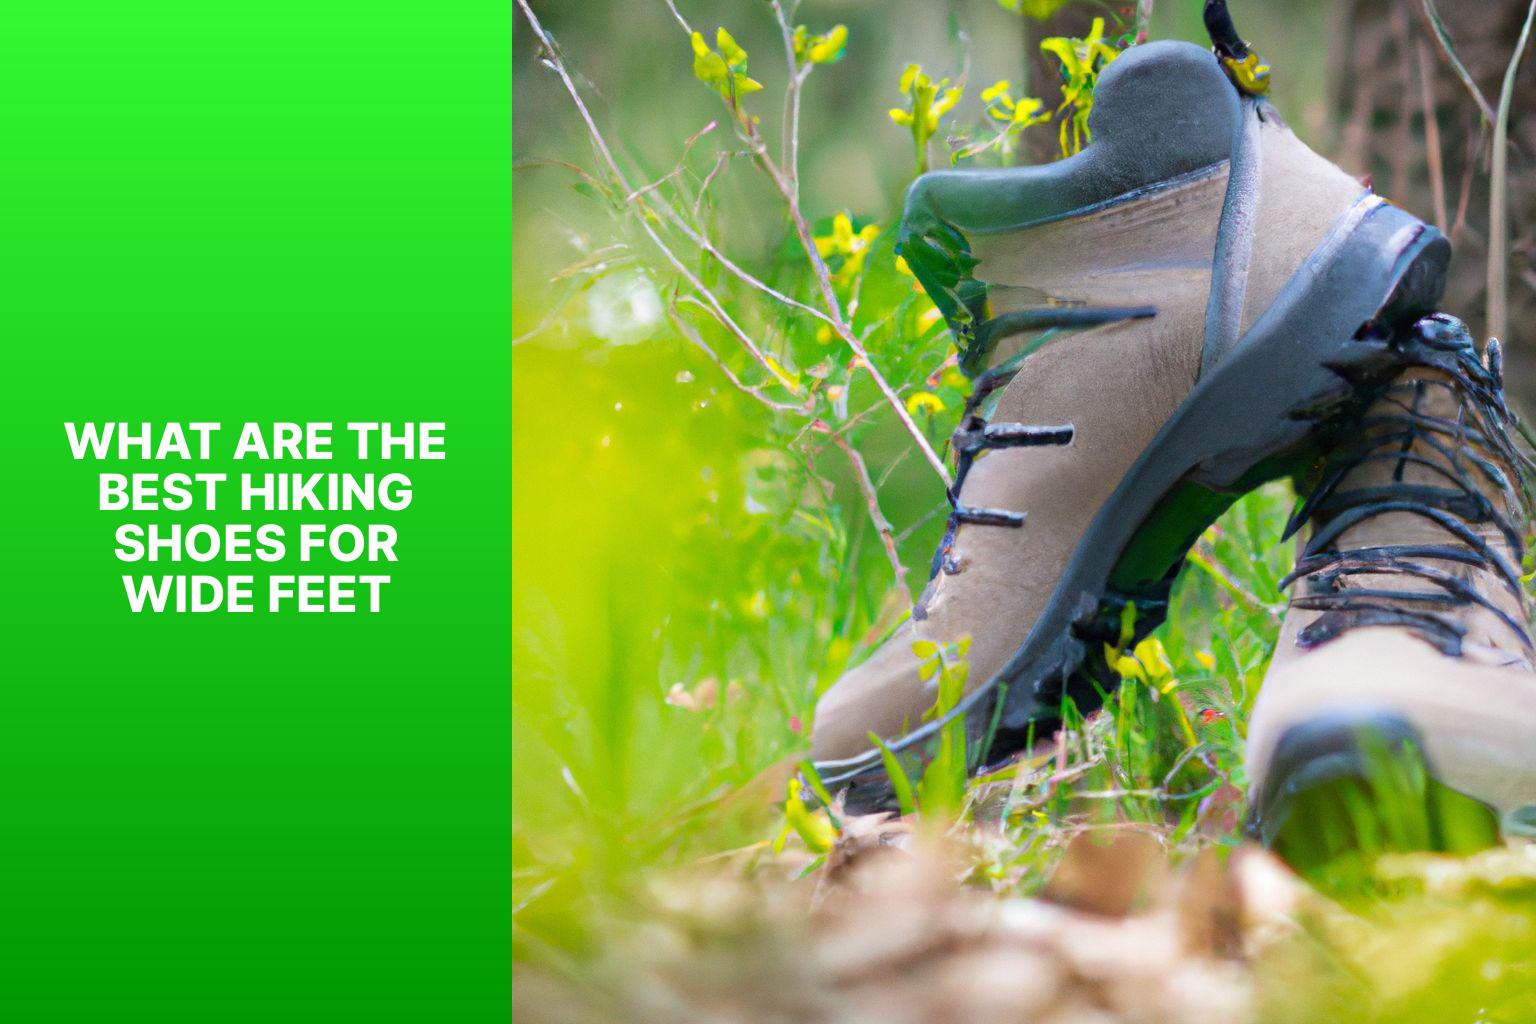 What Are the Best Hiking Shoes for Wide Feet - jasonexplorer.com